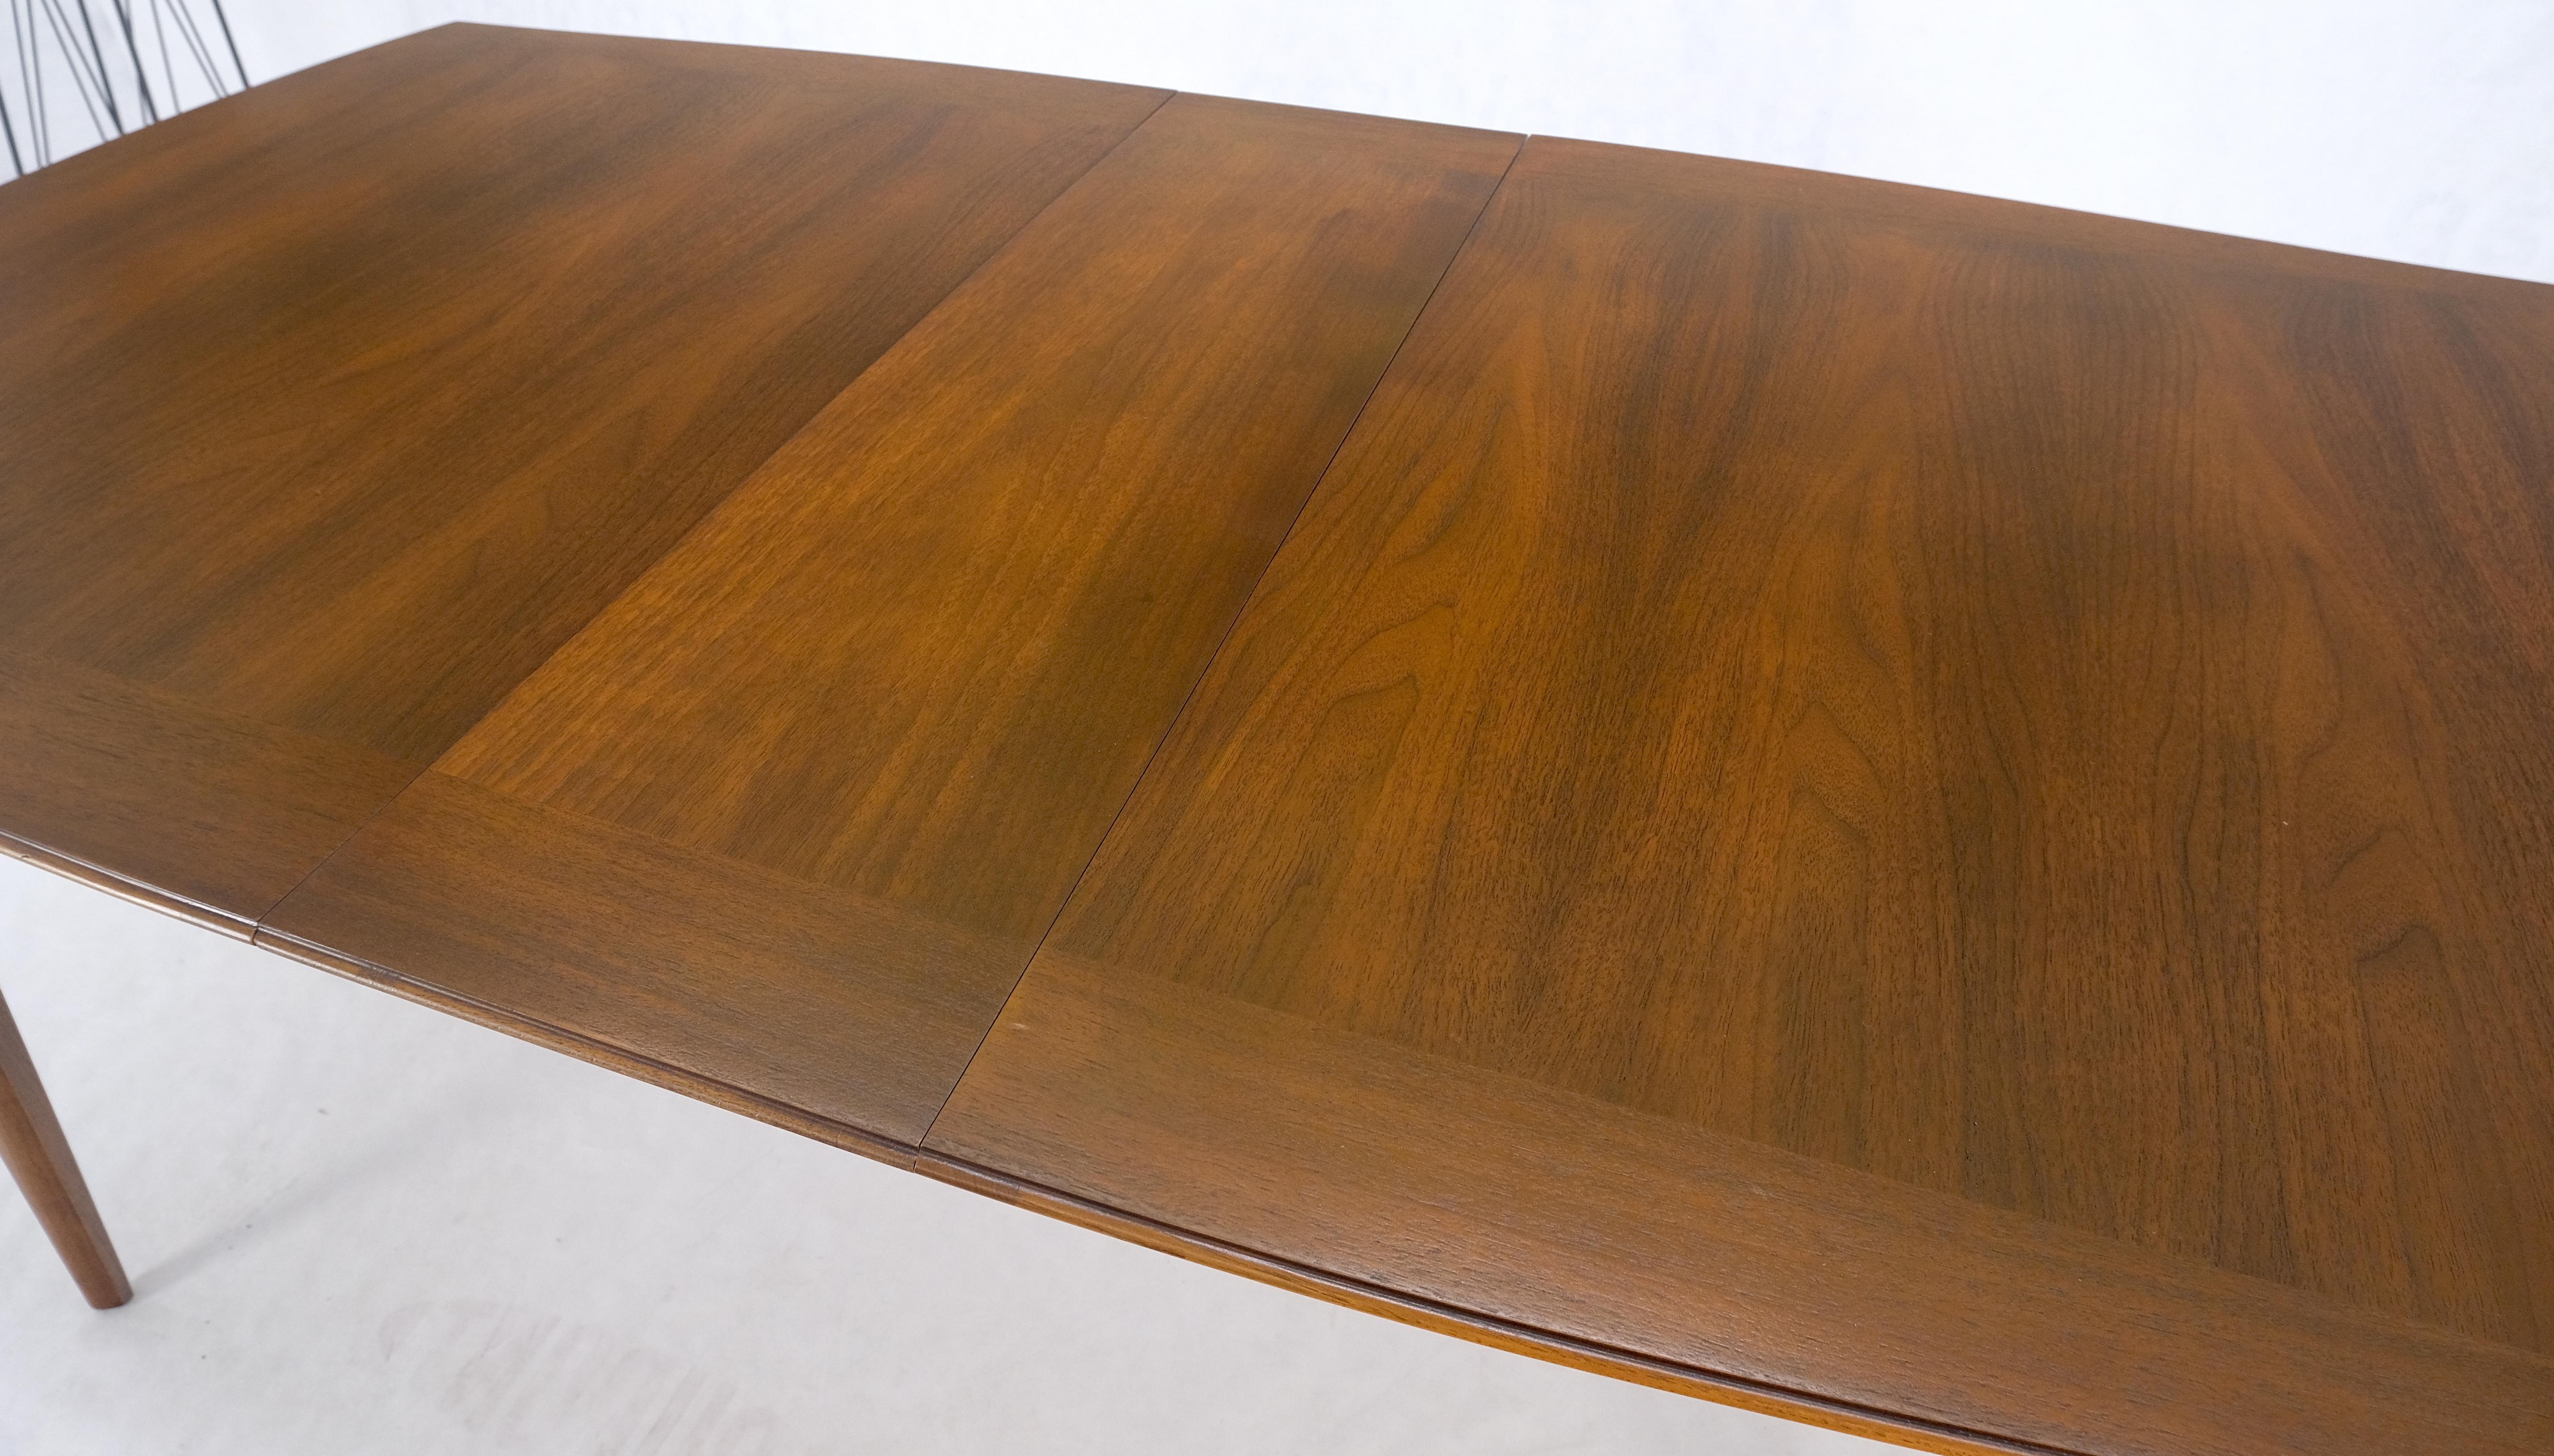 American Light Amber Walnut Mid Century Modern Boat Shape Dining Table 1 Extension Leaf MINT!

one, twelve inch leaves. Total table length is 74 inches.